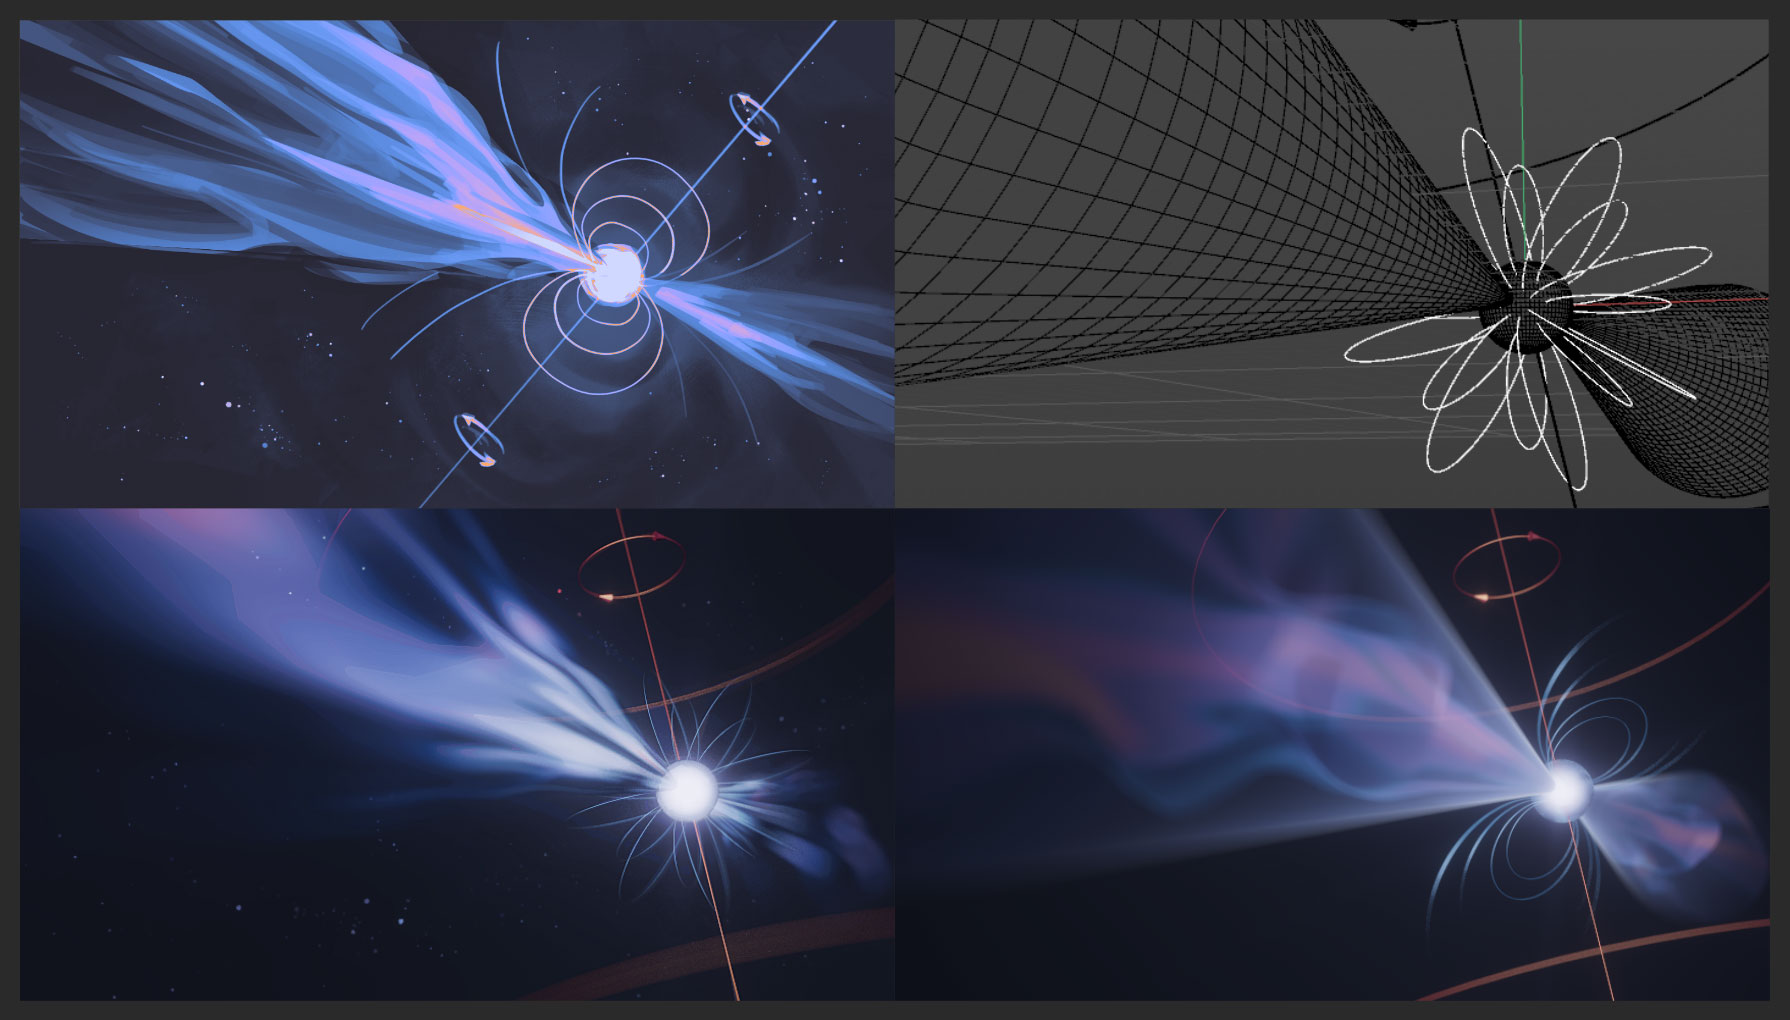 Sketches of a pulsar or AGN with jets